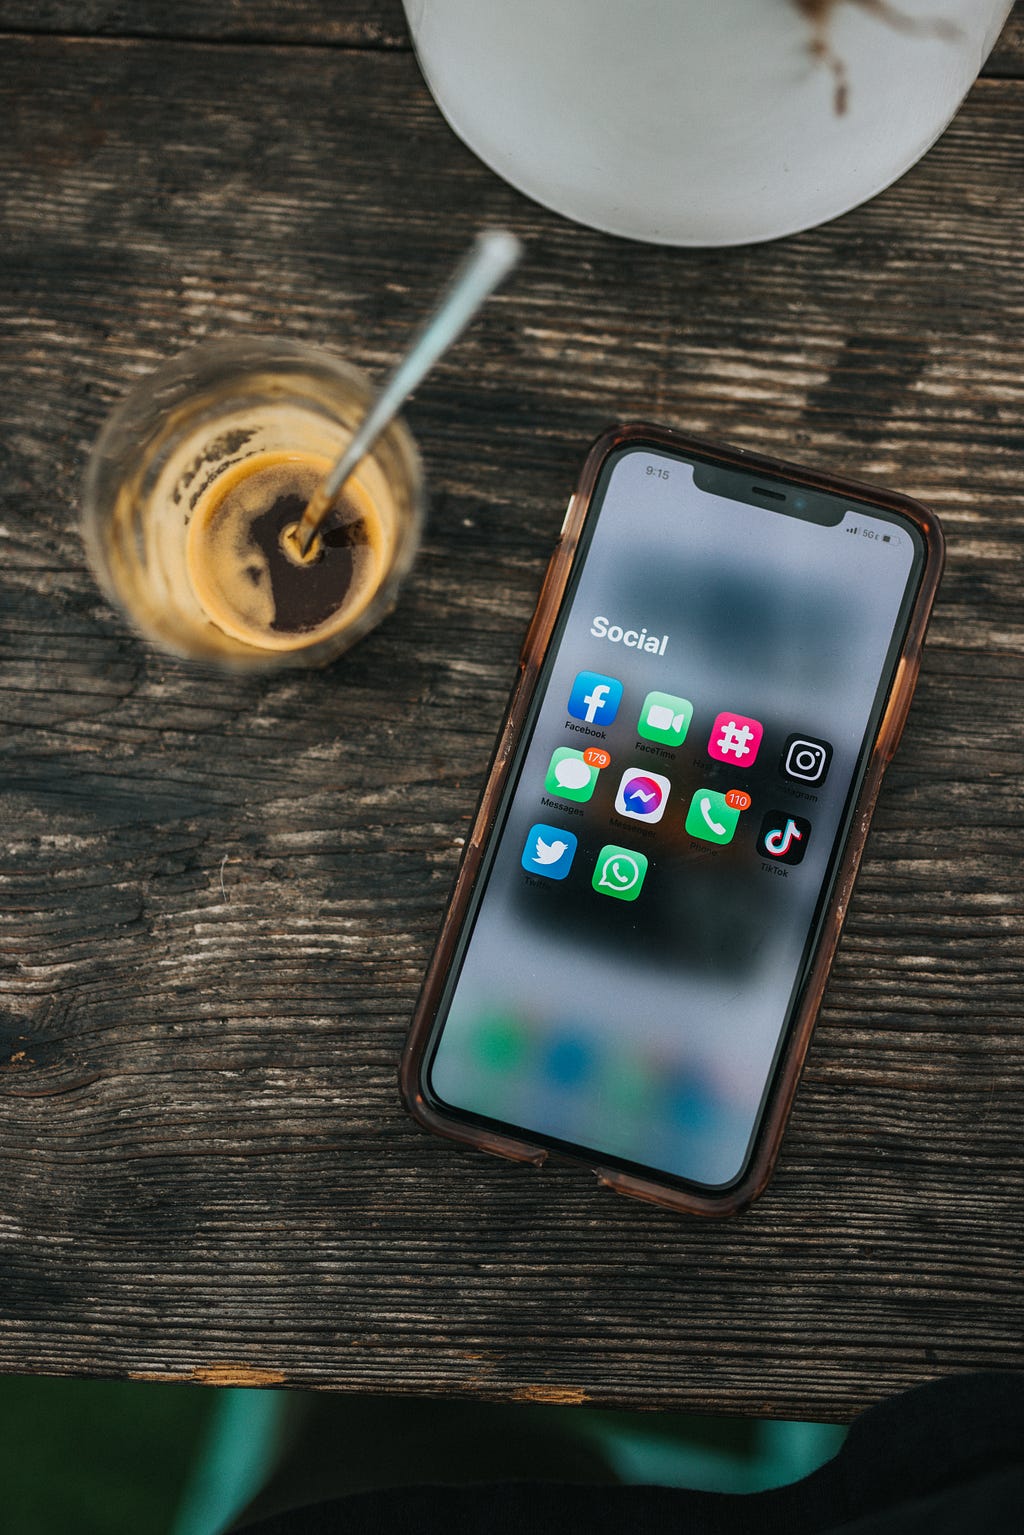 An iPhone laying flat on a table, showing a homescreen view of a few different social apps (including Facebook, Twitter, TikTok, Instagram). The phone is lying next to an almost-empty glass of espresso.